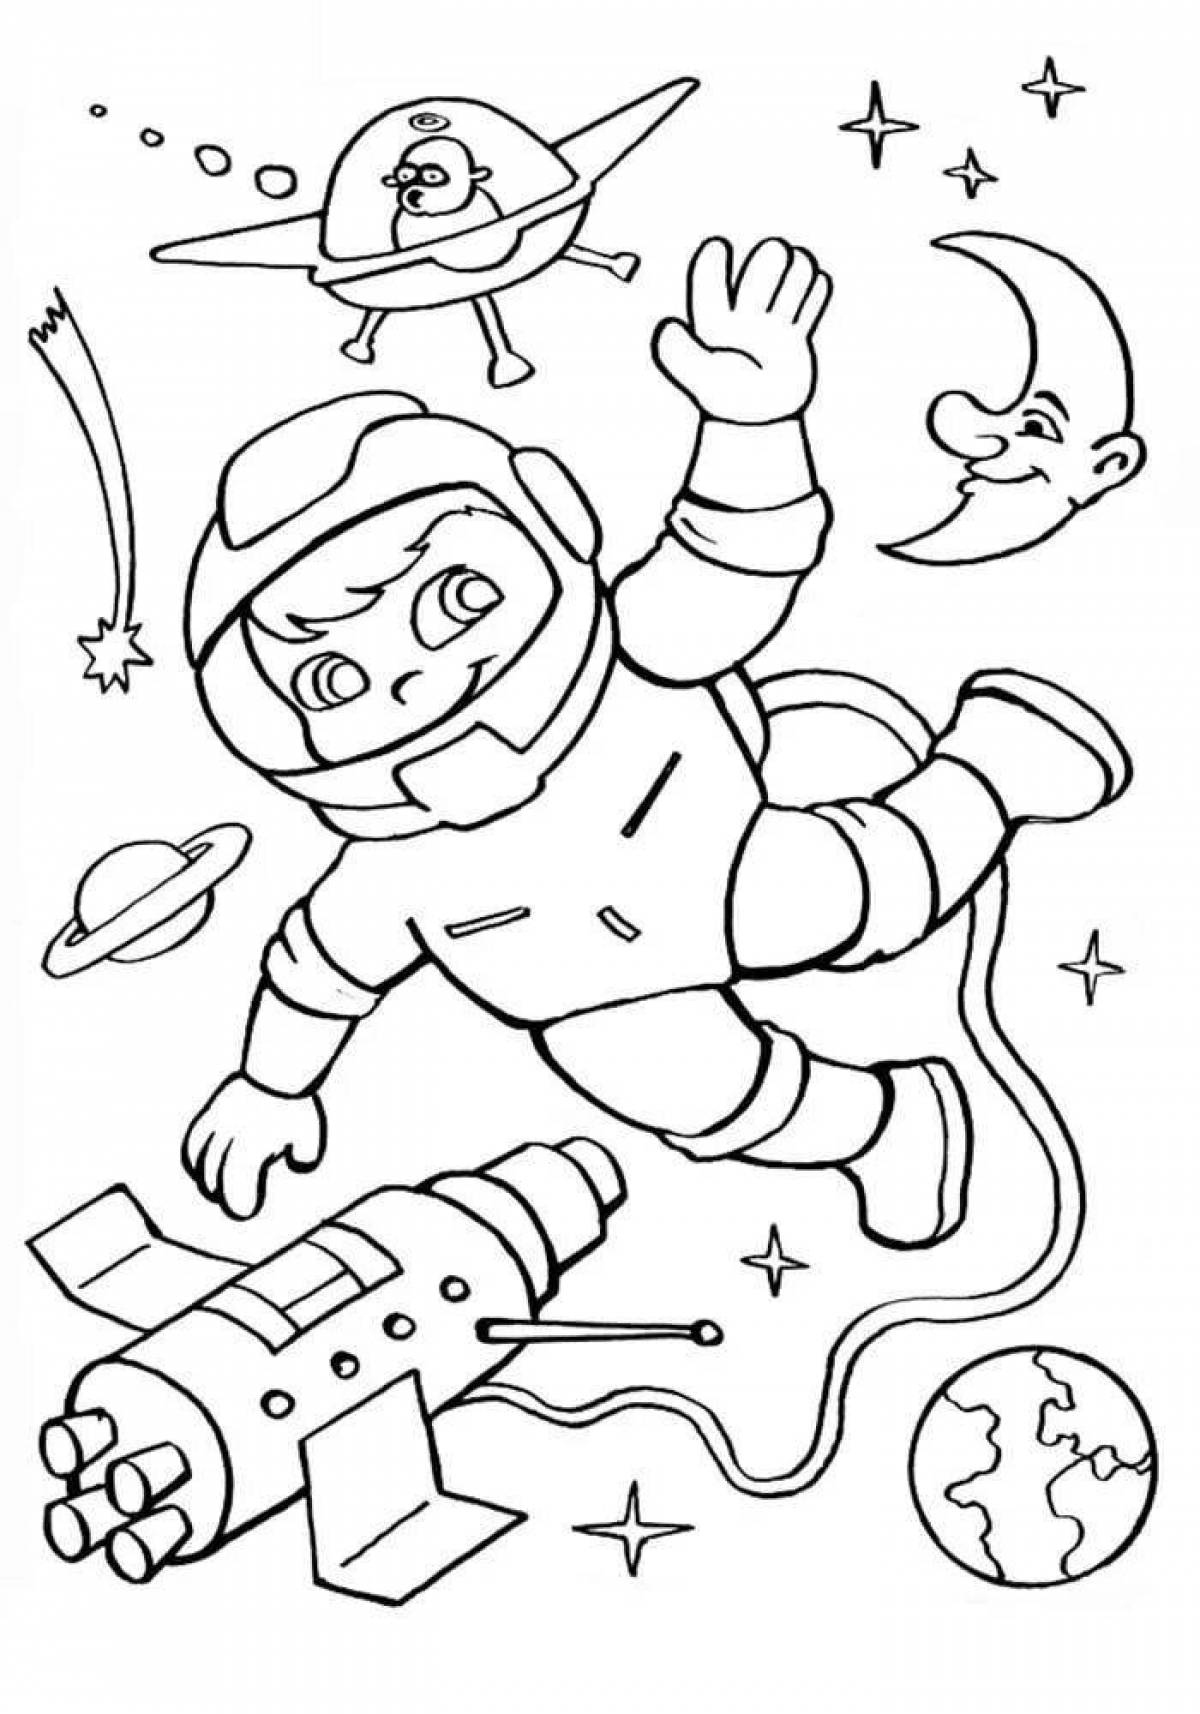 Colorful space coloring book